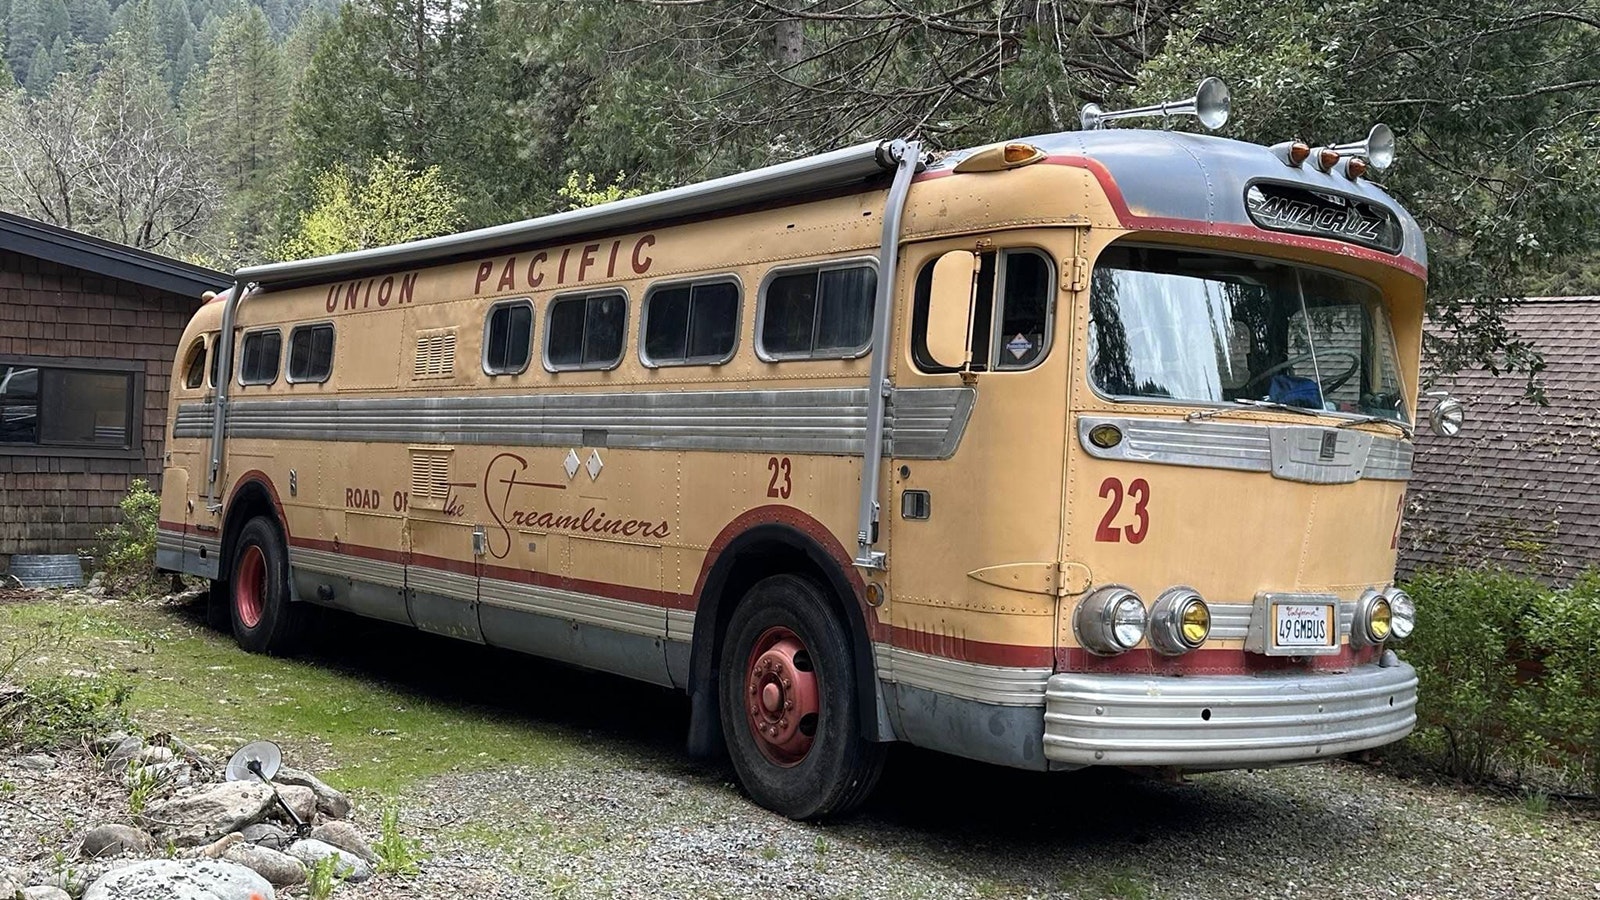 No. 23 is one of only two 1949 GMC Union Pacific passenger buses known to exist. It still has its original paint, logos and accessories, like the horns on the roof.